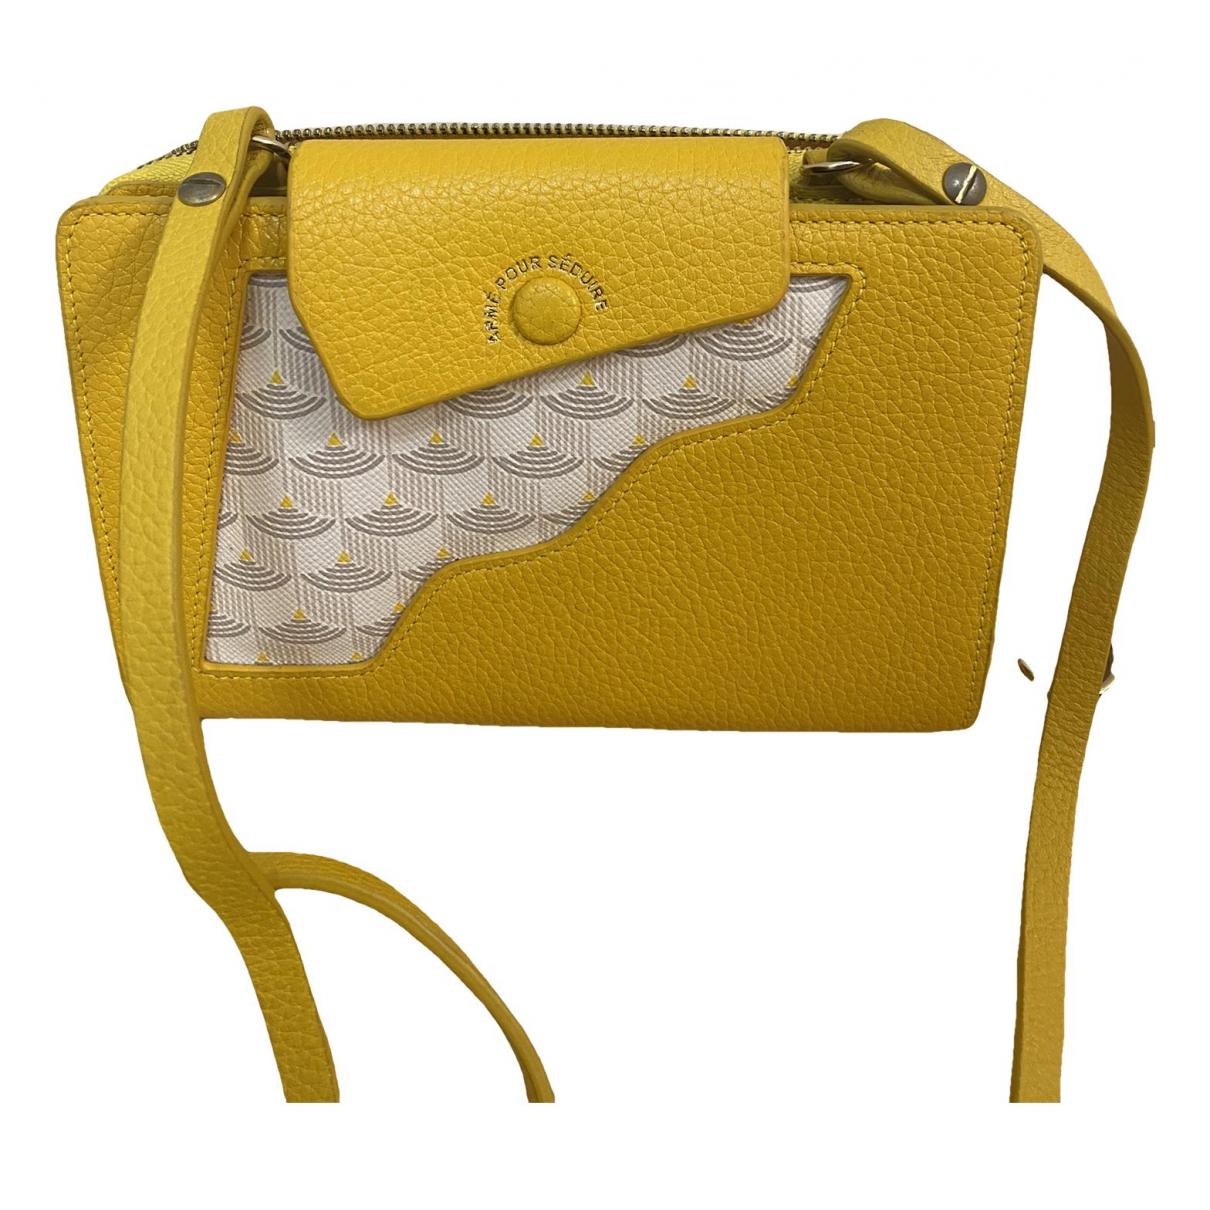 Fauré Le Page Handbags  Buy or Sell your Designer bags